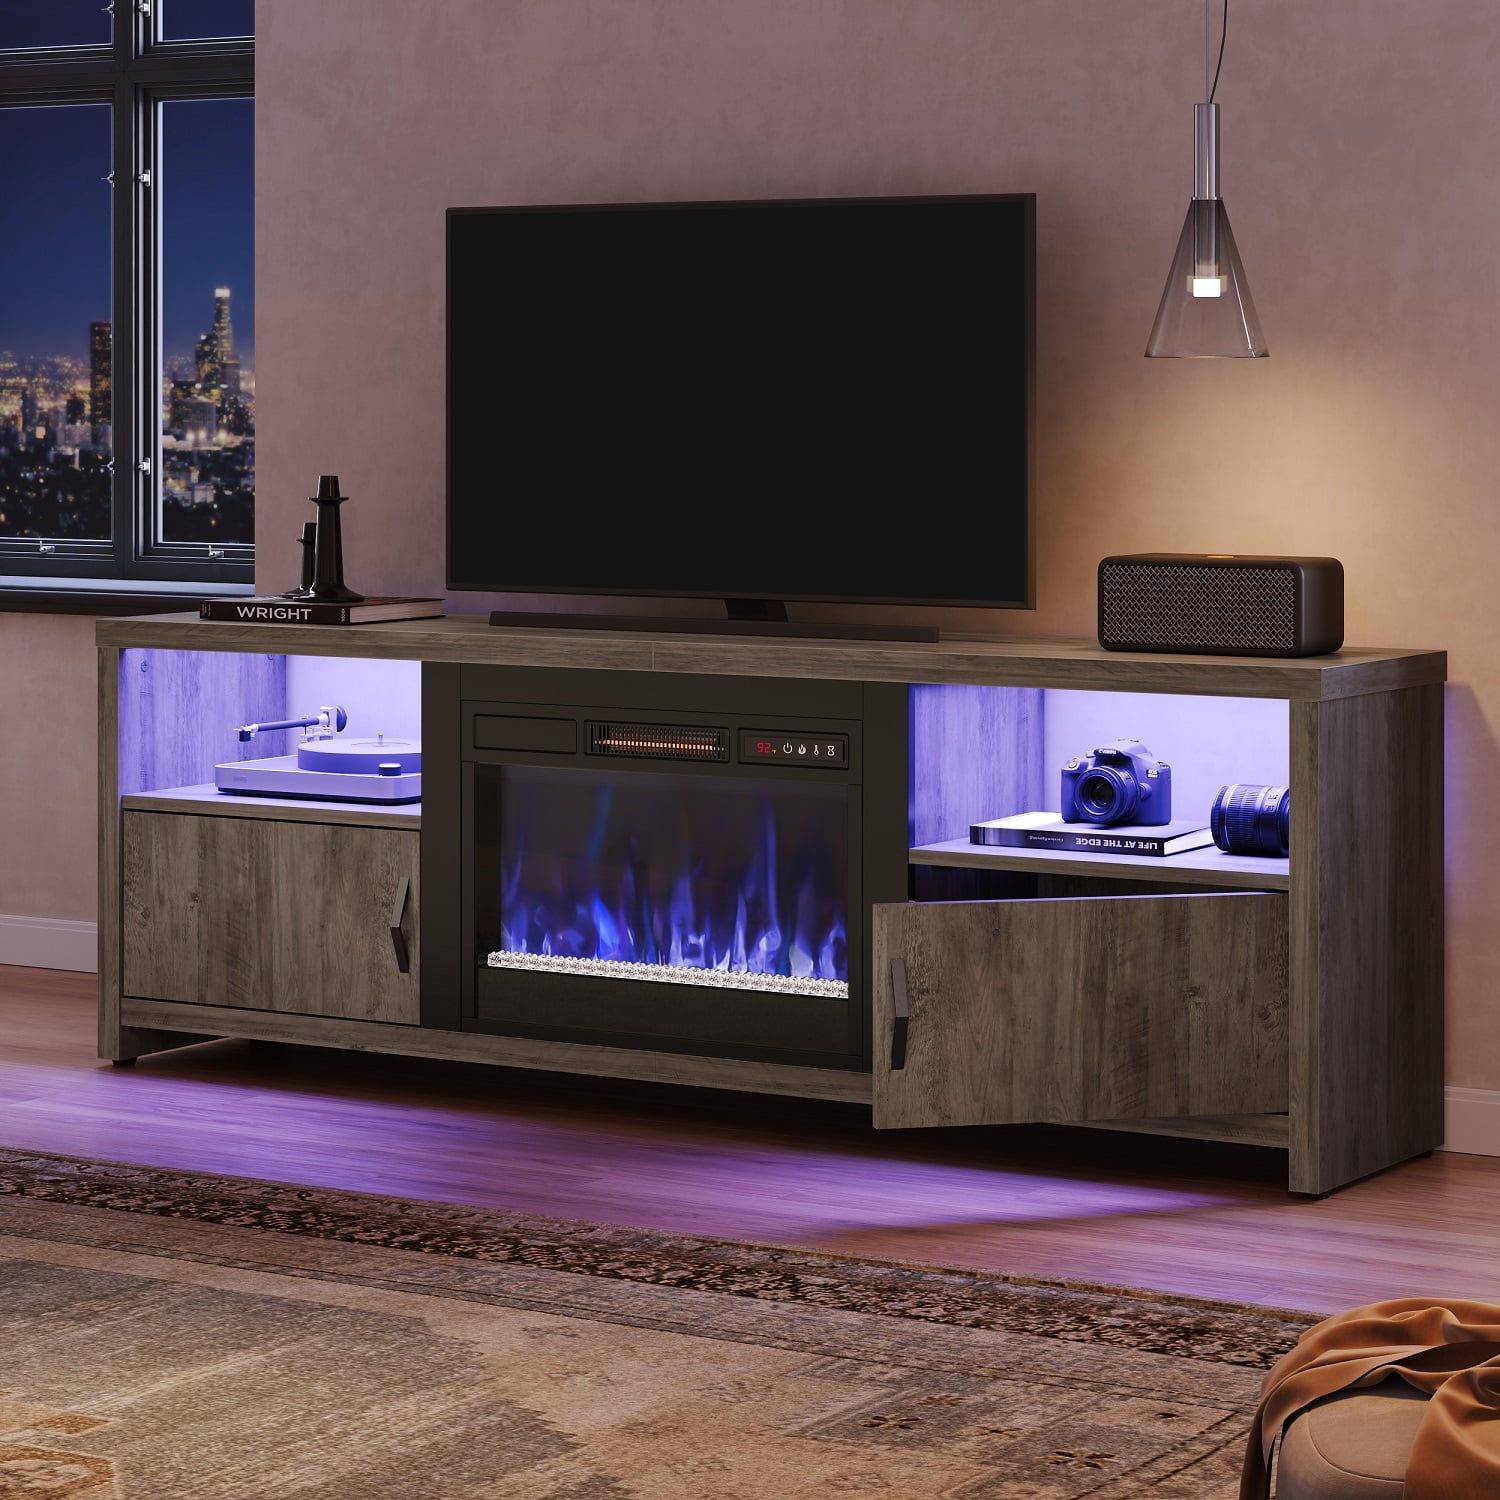 Bestier Electric Fireplace Tv Stand For Tvs Up To 75" Entertainment Intended For Bestier Tv Stand For Tvs Up To 75" (Gallery 8 of 20)